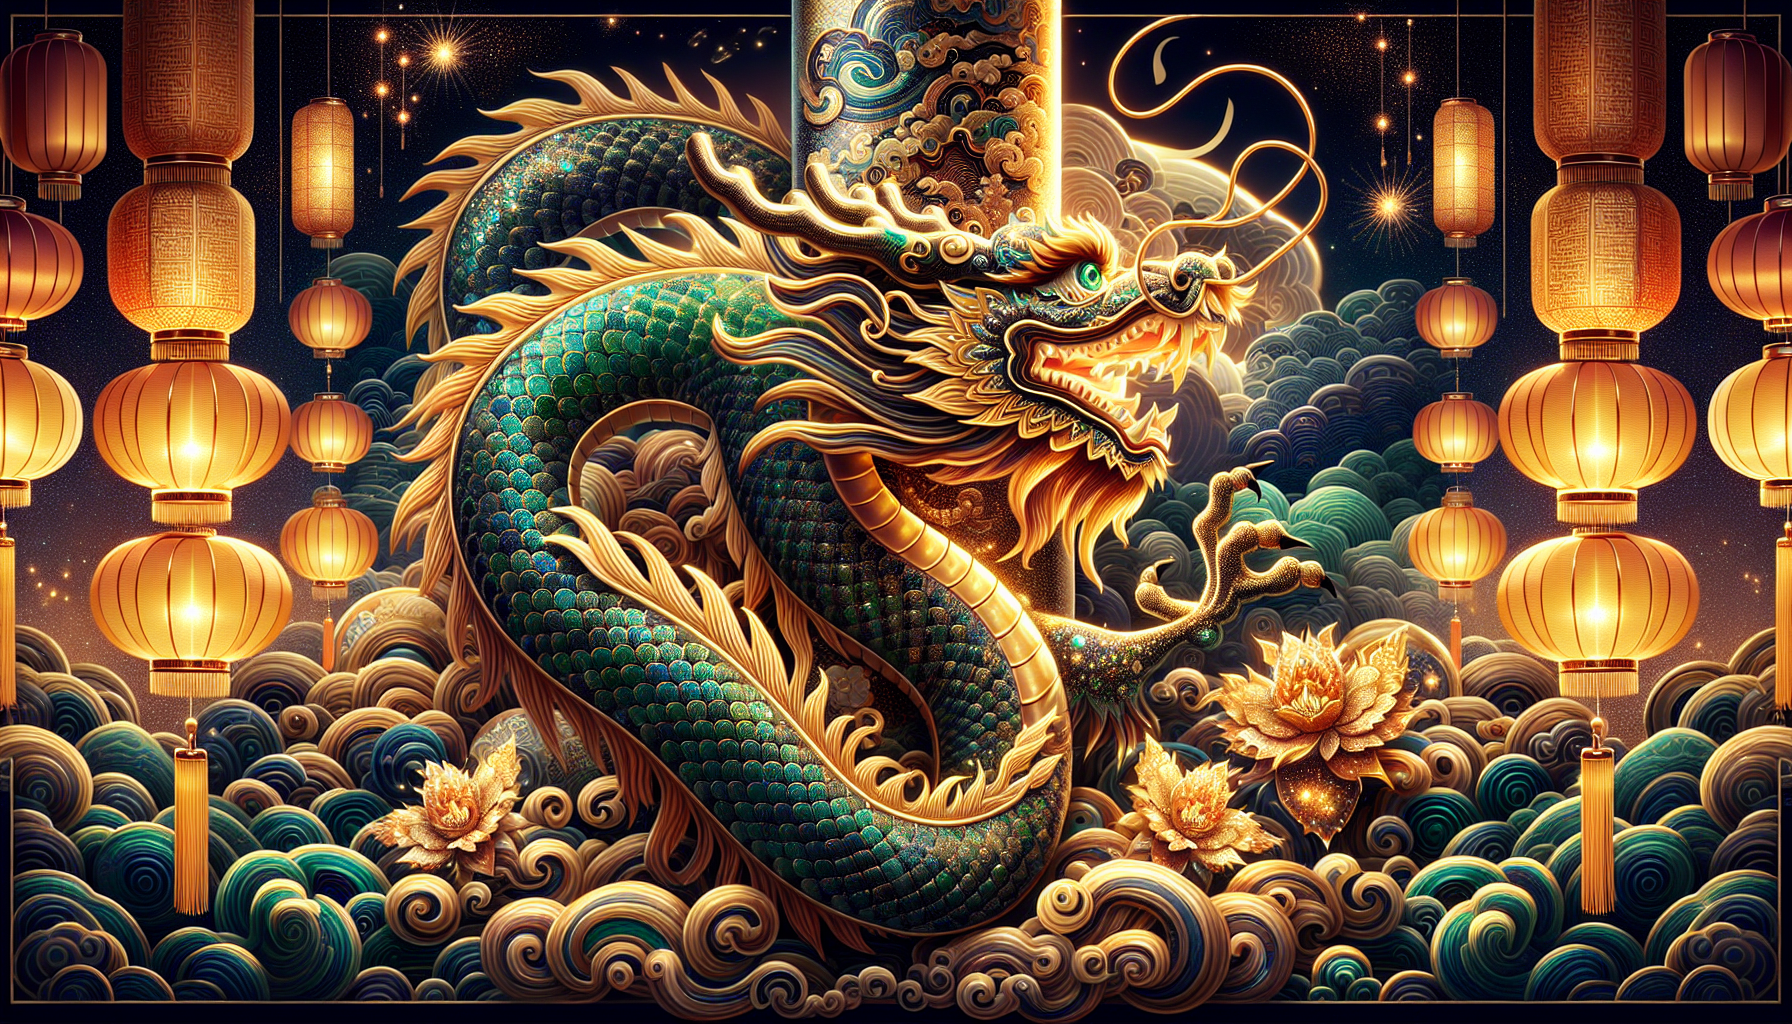 Dragon symbolizing power and good luck